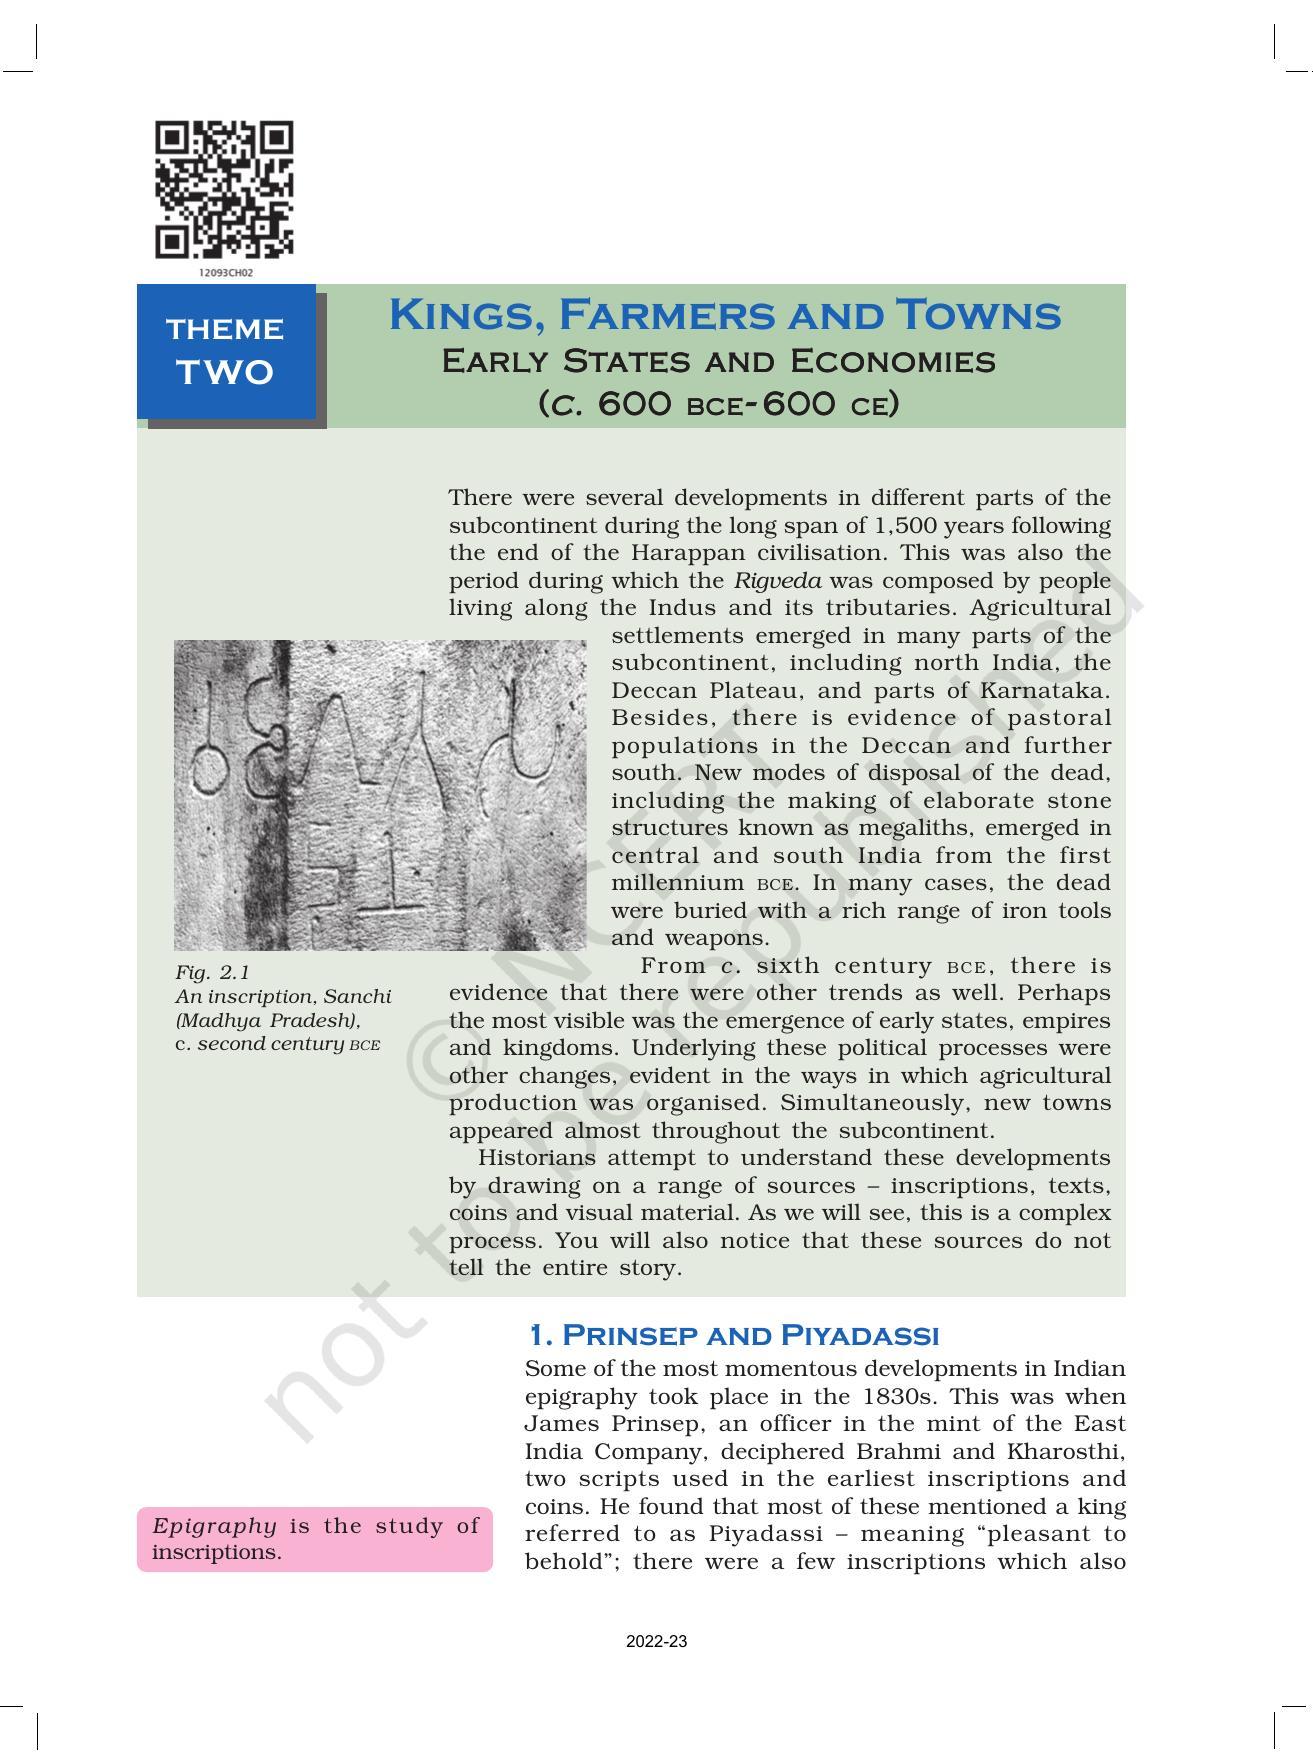 NCERT Book for Class 12 History (Part-1) Chapter 2 Kings, Farmers, and Towns - Page 1